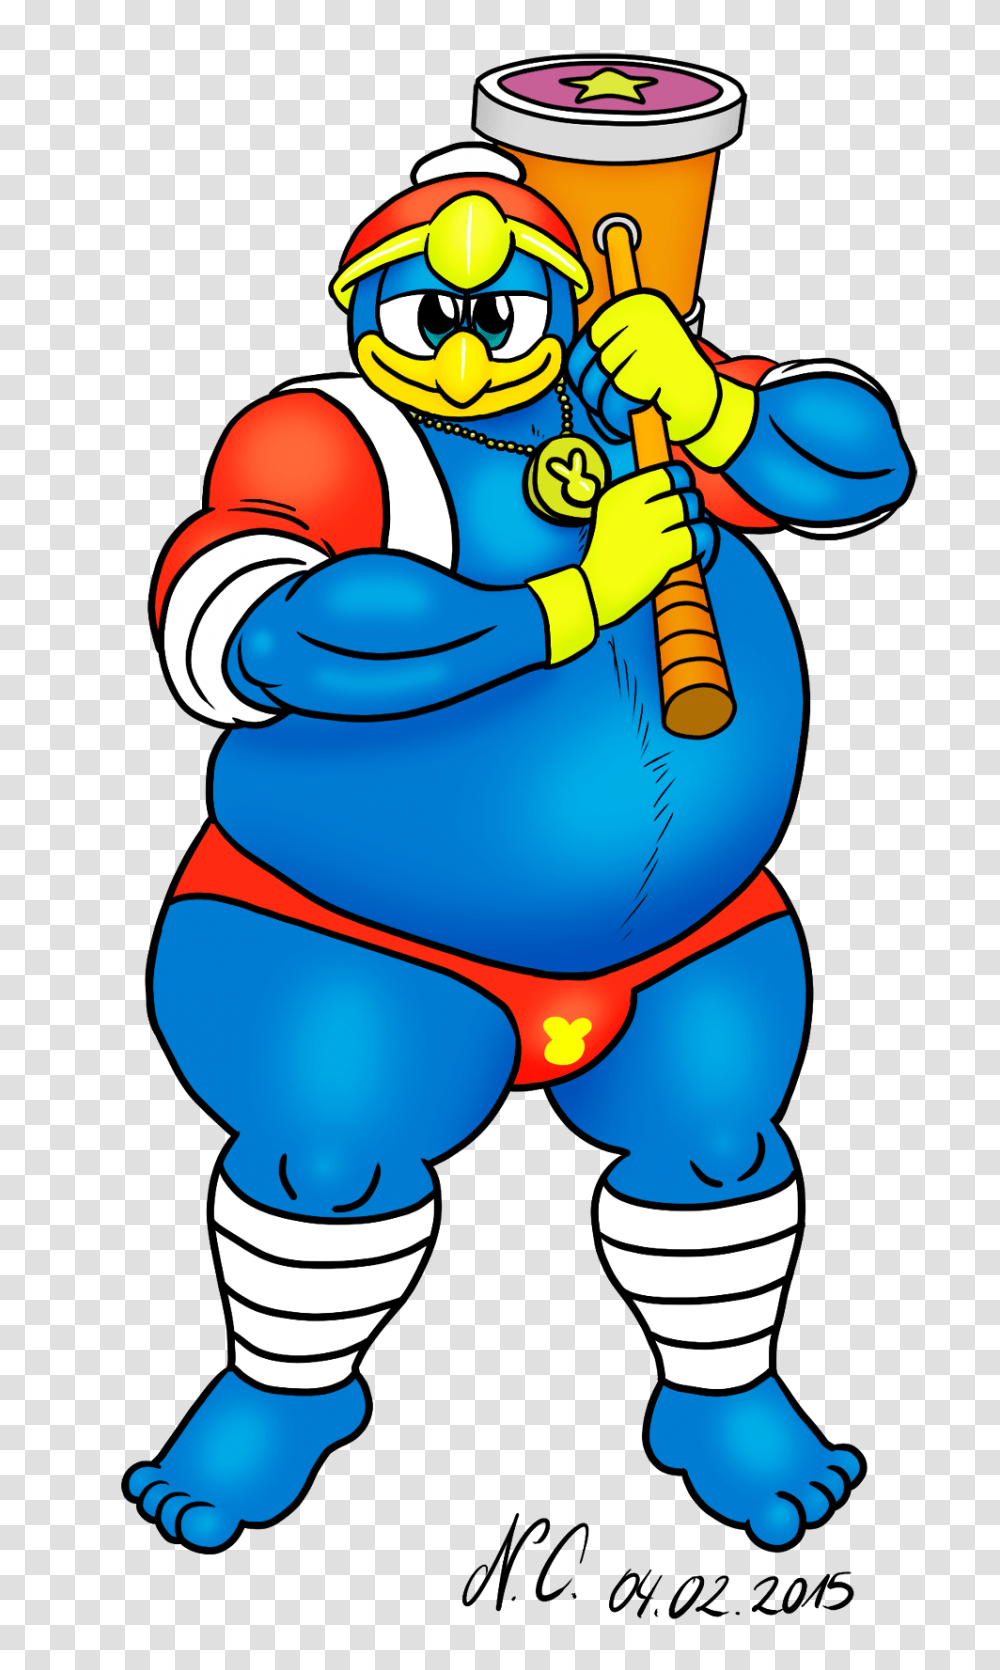 King Dedede With A More Revealing Outfit Weasyl, Super Mario, Outdoors, Juggling, Costume Transparent Png